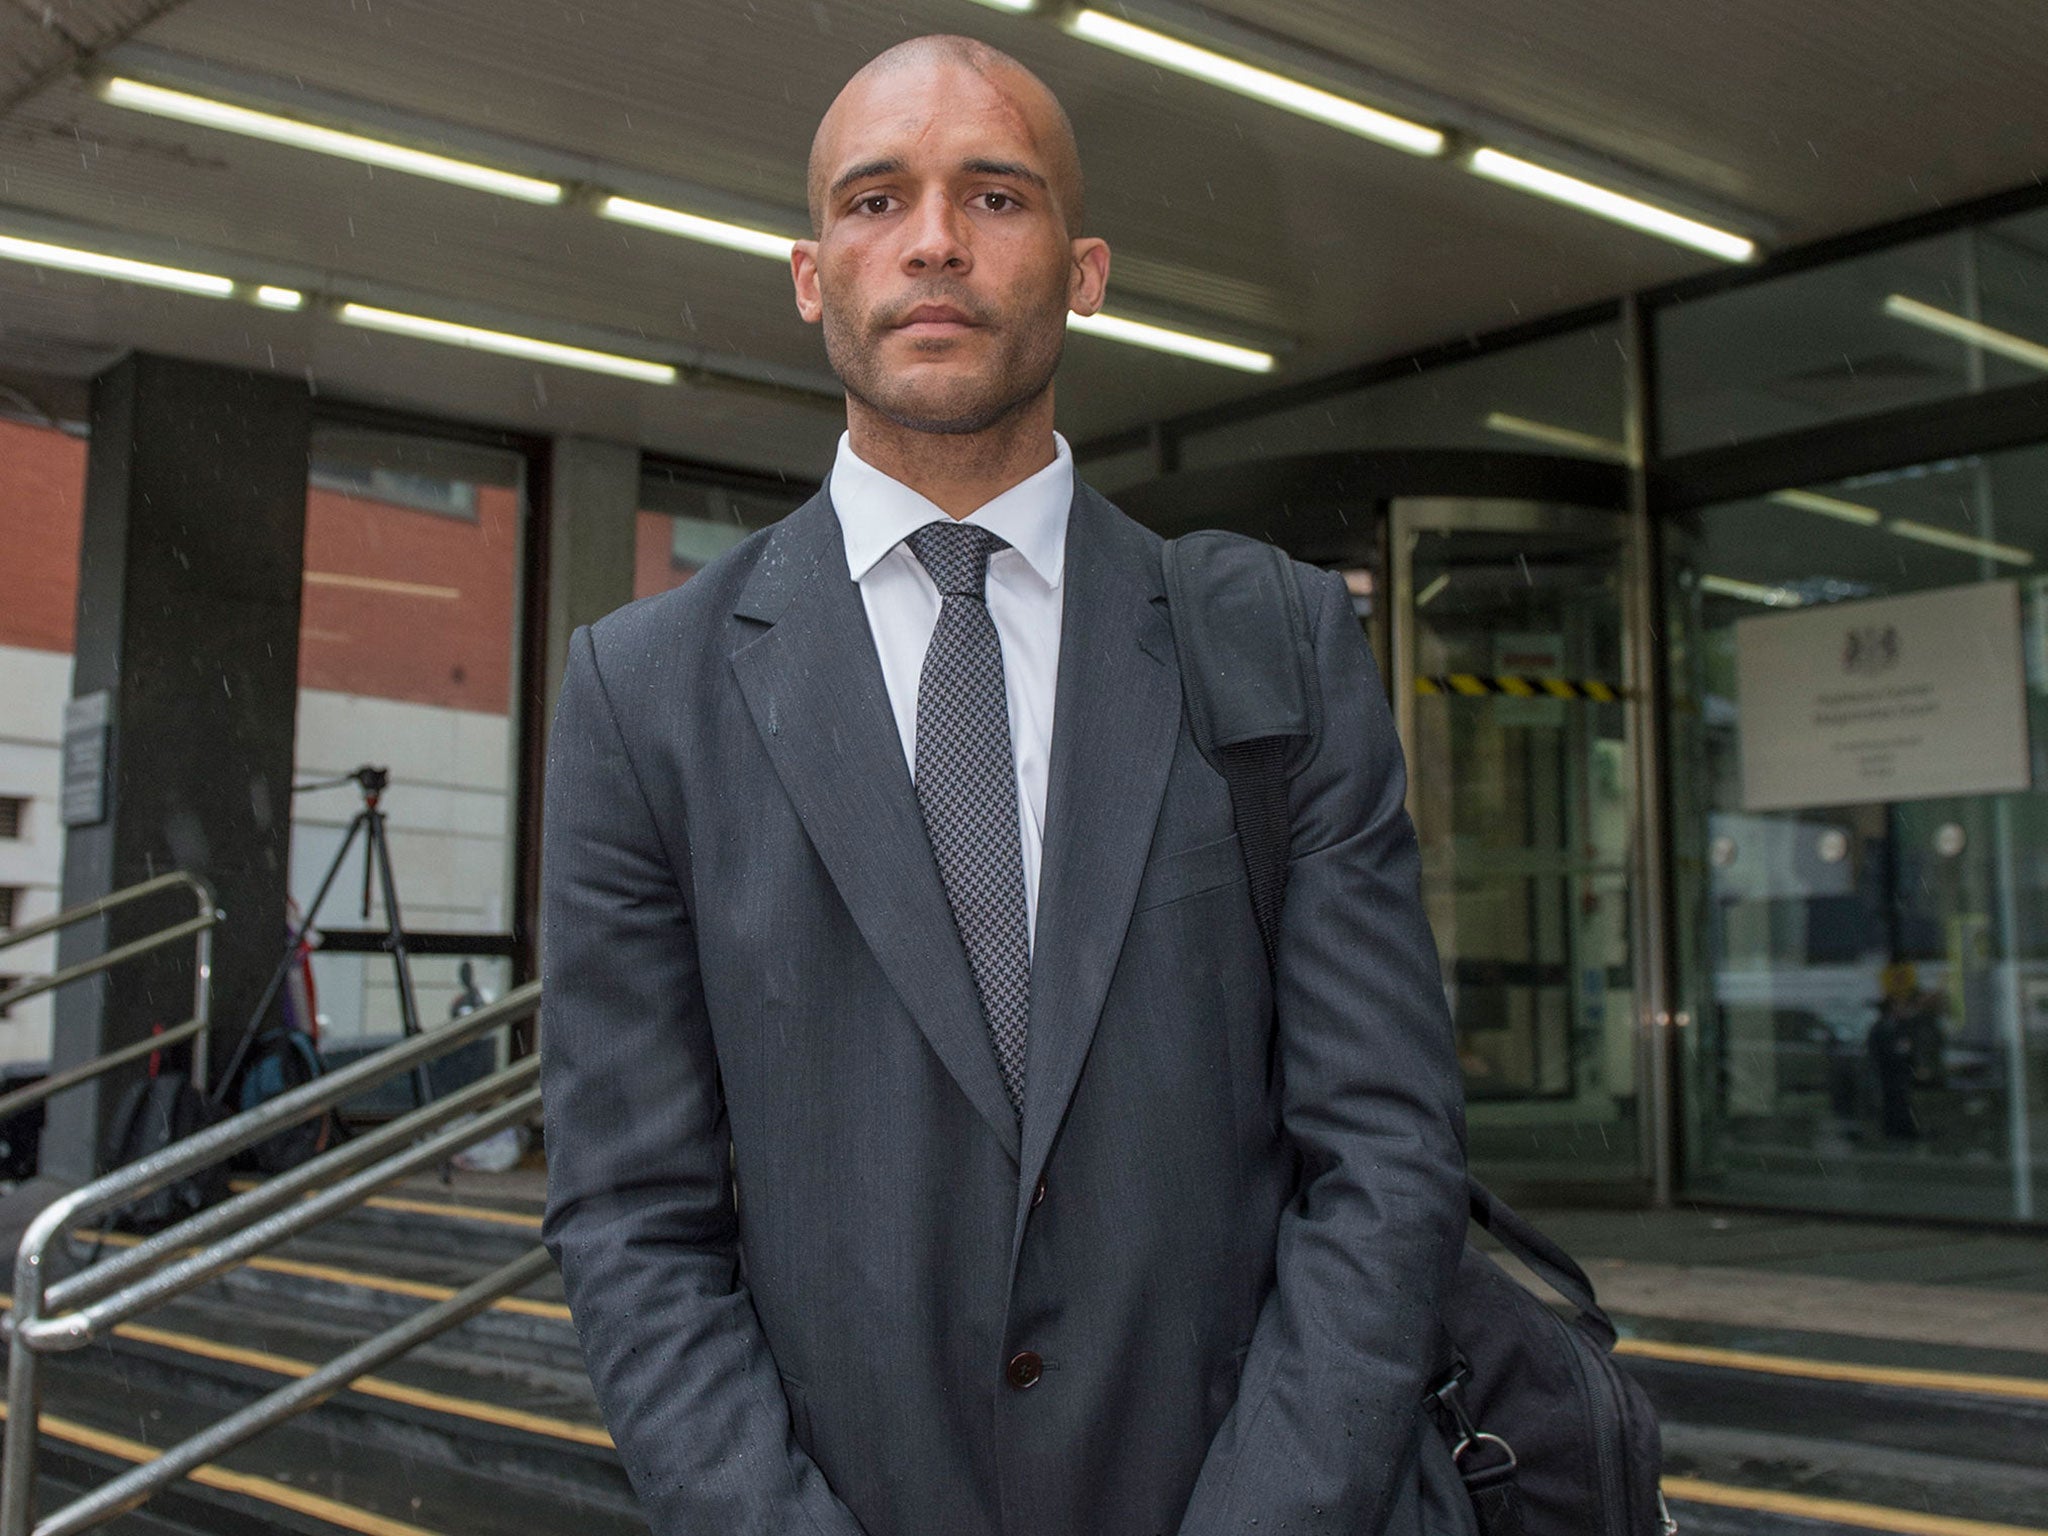 Clarke Carlisle was given 150 hours’ community work at Highbury magistrates’ court